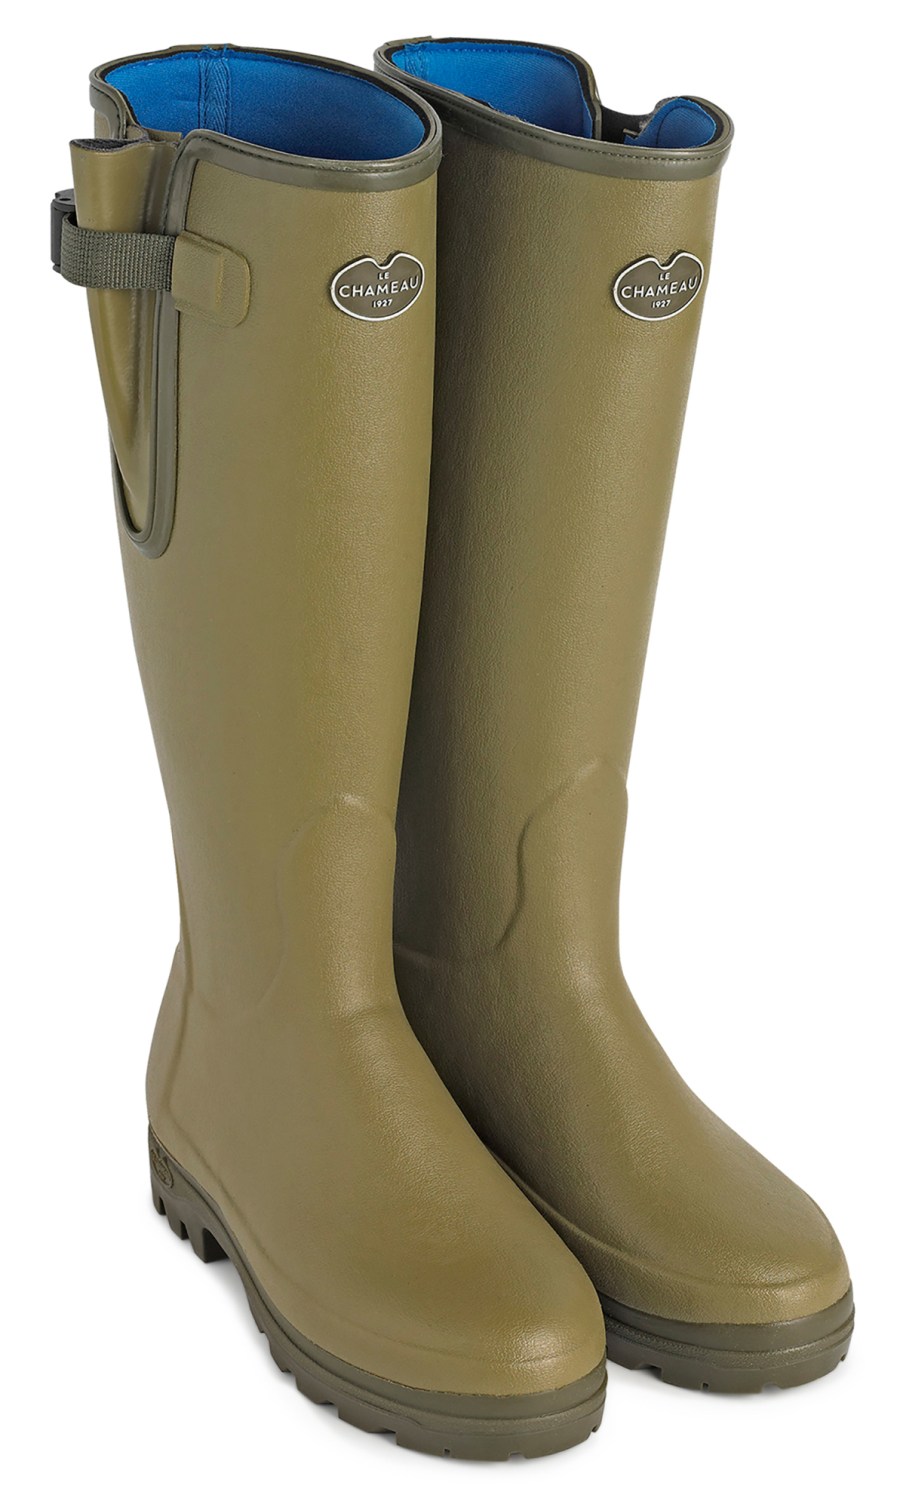 A pair of Le Chameau Vierzonord Neoprene Lined Boots in olive green 